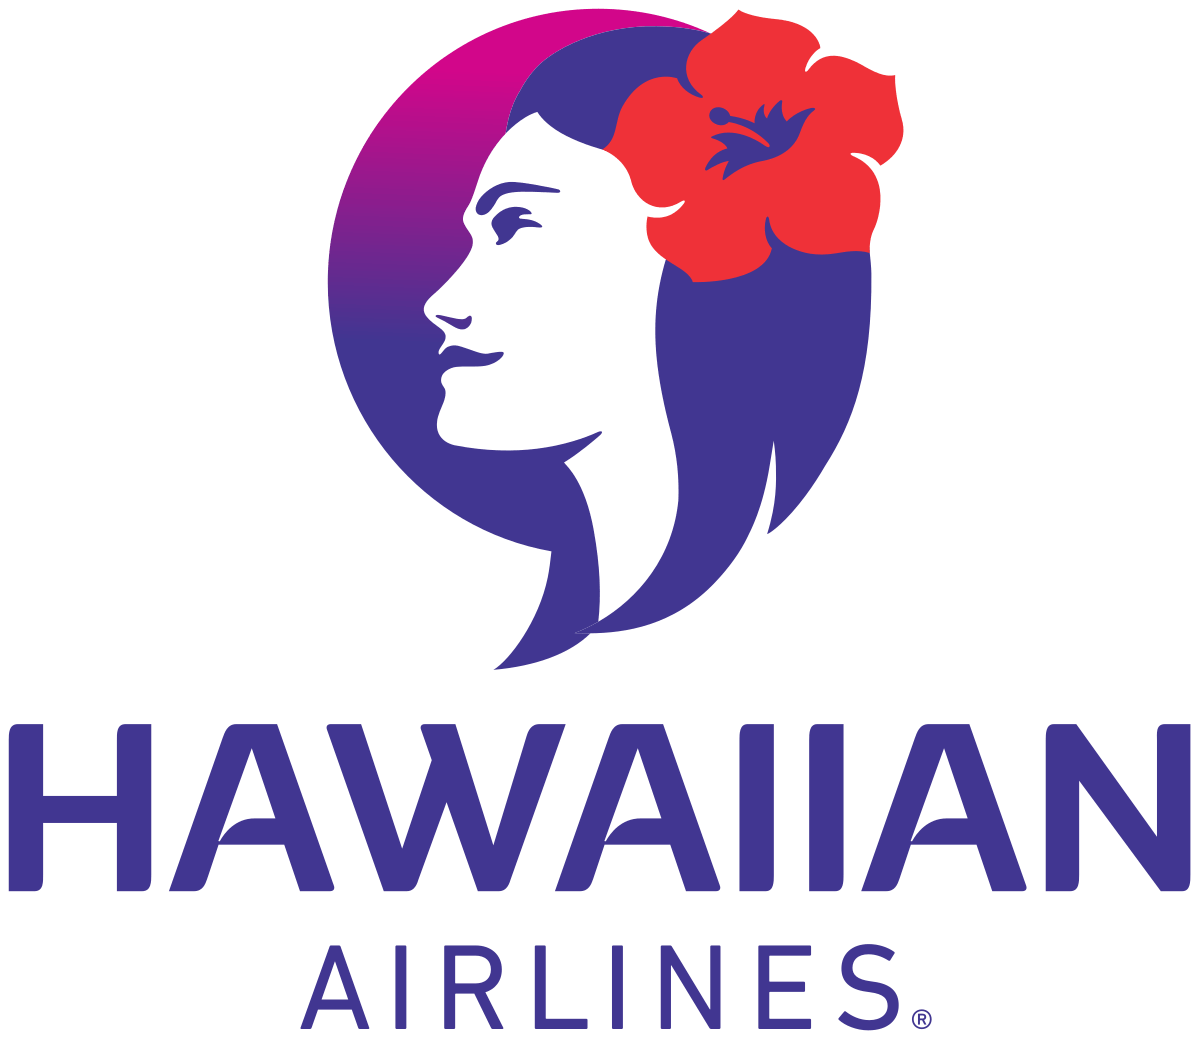 Largest Airlines Logo - Hawaiian Airlines